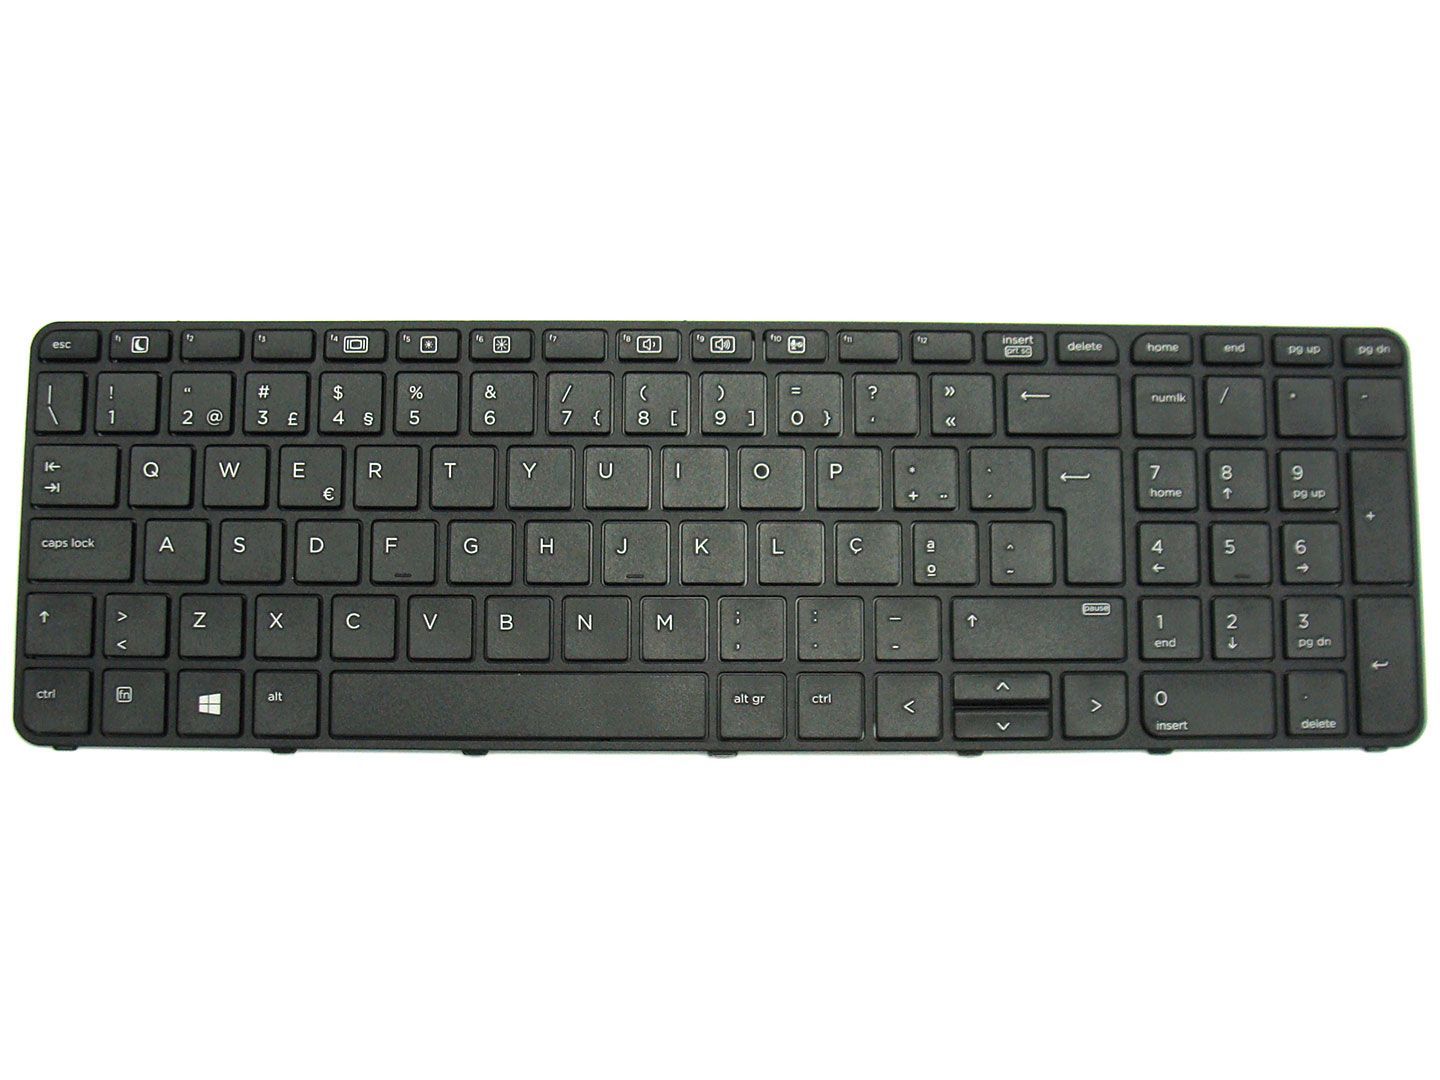 Made a contract Accessible Filth Teclado PT s/Backlight para HP PROBOOK 450 G3, 450 G4, 455 G3, 455 G4, 470  G3, 470 G4, 640 G2, 640 G3, 645 G2, 645 G3, 650 G2, 650 G3, 655 G2, 655 G3  15" (827028-131, 831021-131, 837549-131, 841136-131) N - HPecas.com